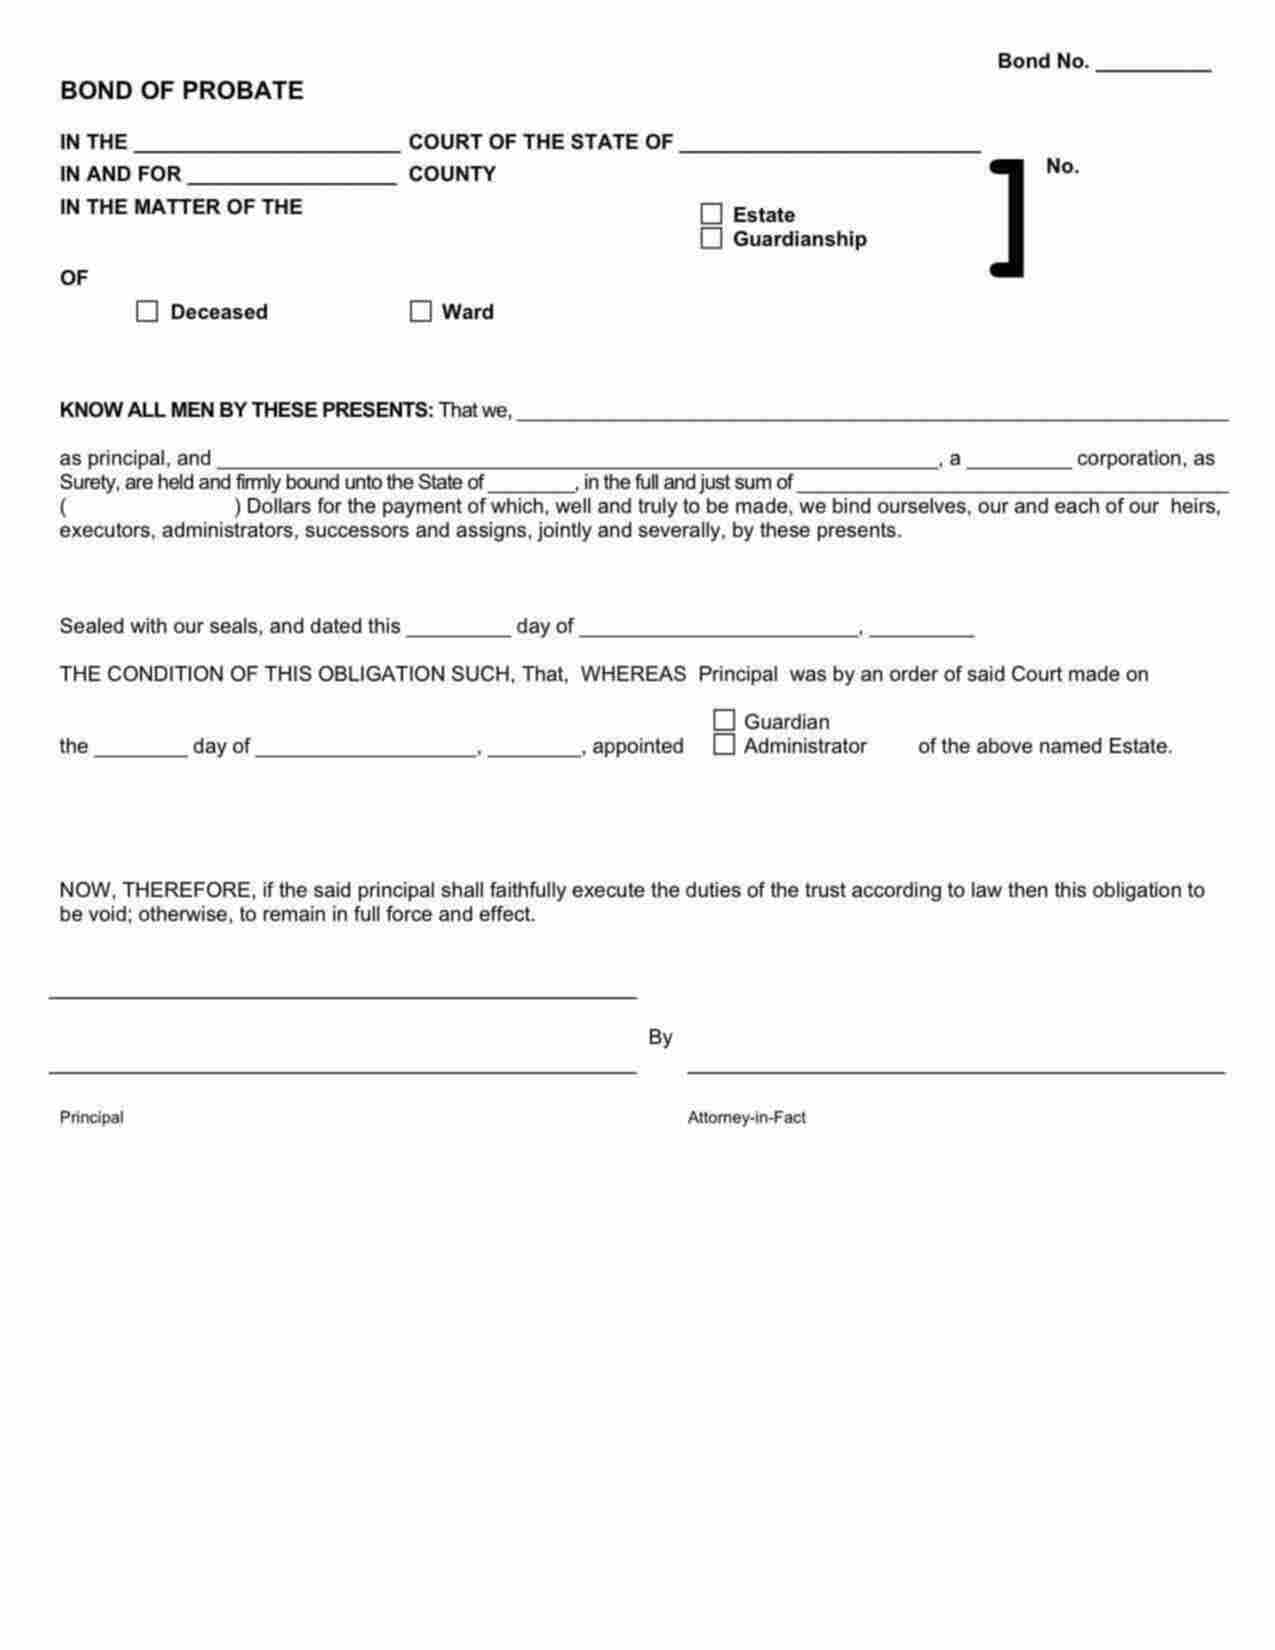 Tennessee Probate Administrator, Executor, Conservator, or Guardian Bond Form